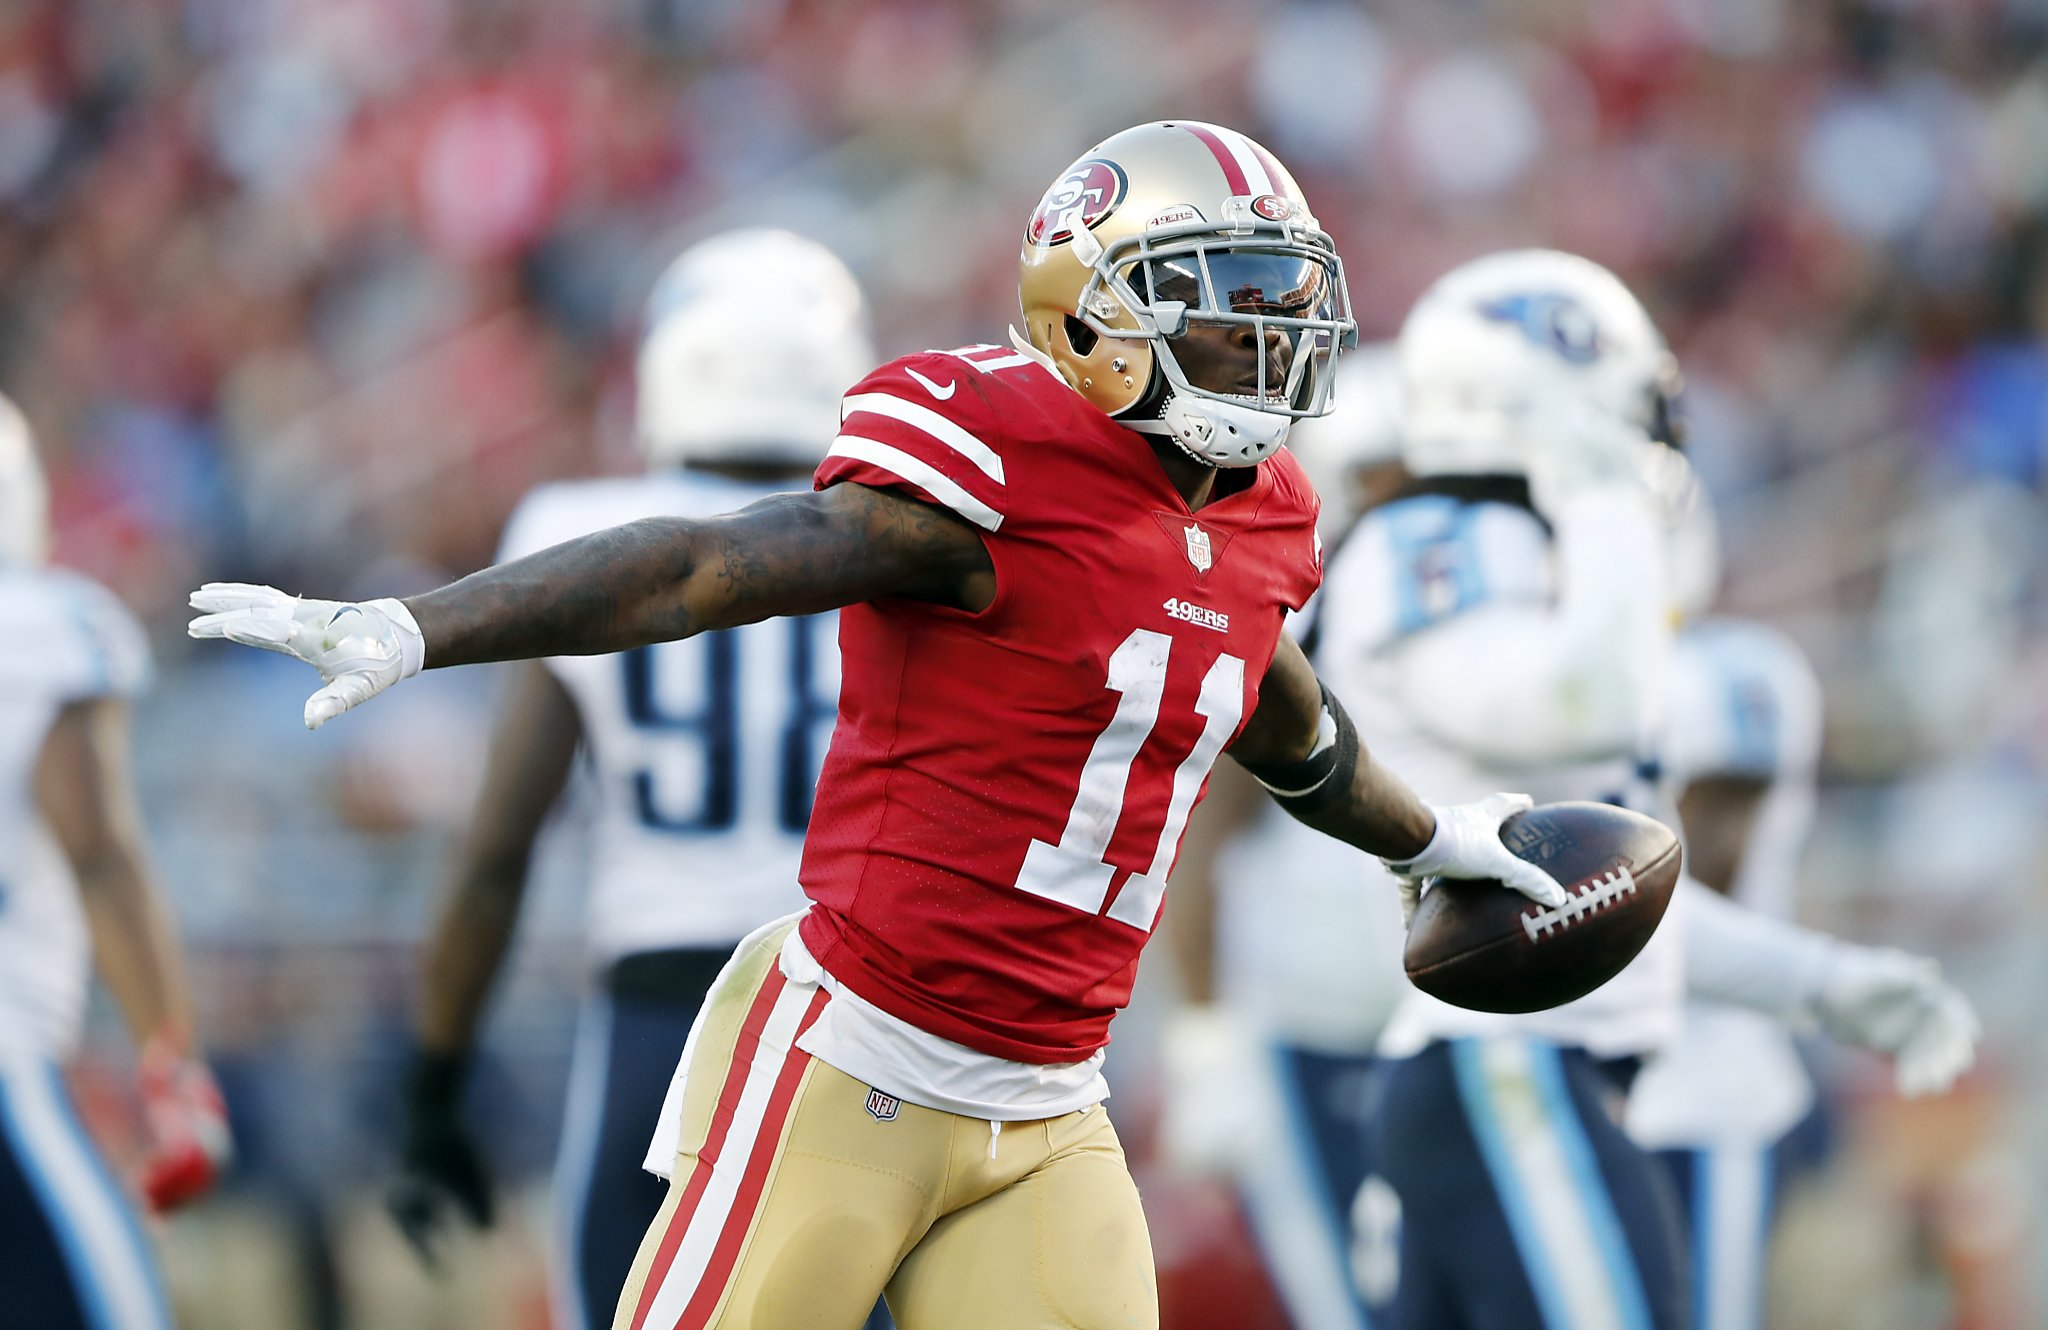 49ers’ Goodwin continues to flourish amid tragedy - SFChronicle.com